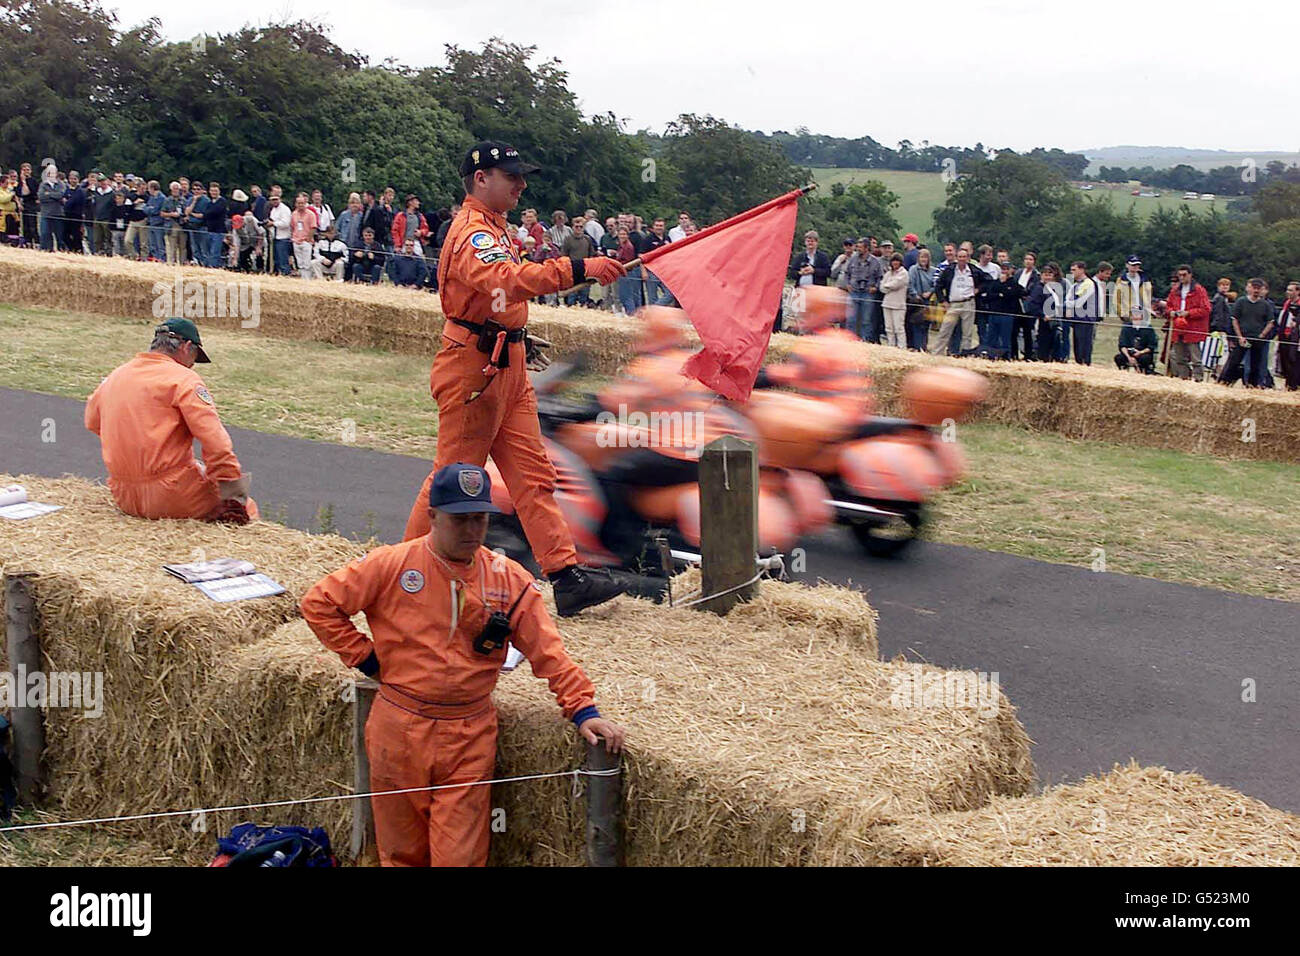 Track marshals watch the action near the finishing line at the Goodwood Festival of Speed in Sussex. Driver John Dawson-Damer crashed his 1969 Lotus Formula 1 car killing himself and a marshal as he crossed the line. * It is believed he lost control on the grass verge and struck a temporary gantry which has been removed. Mr Dawson-Damer's brother, The Earl of Portarlington paid tribute to his brother. Stock Photo